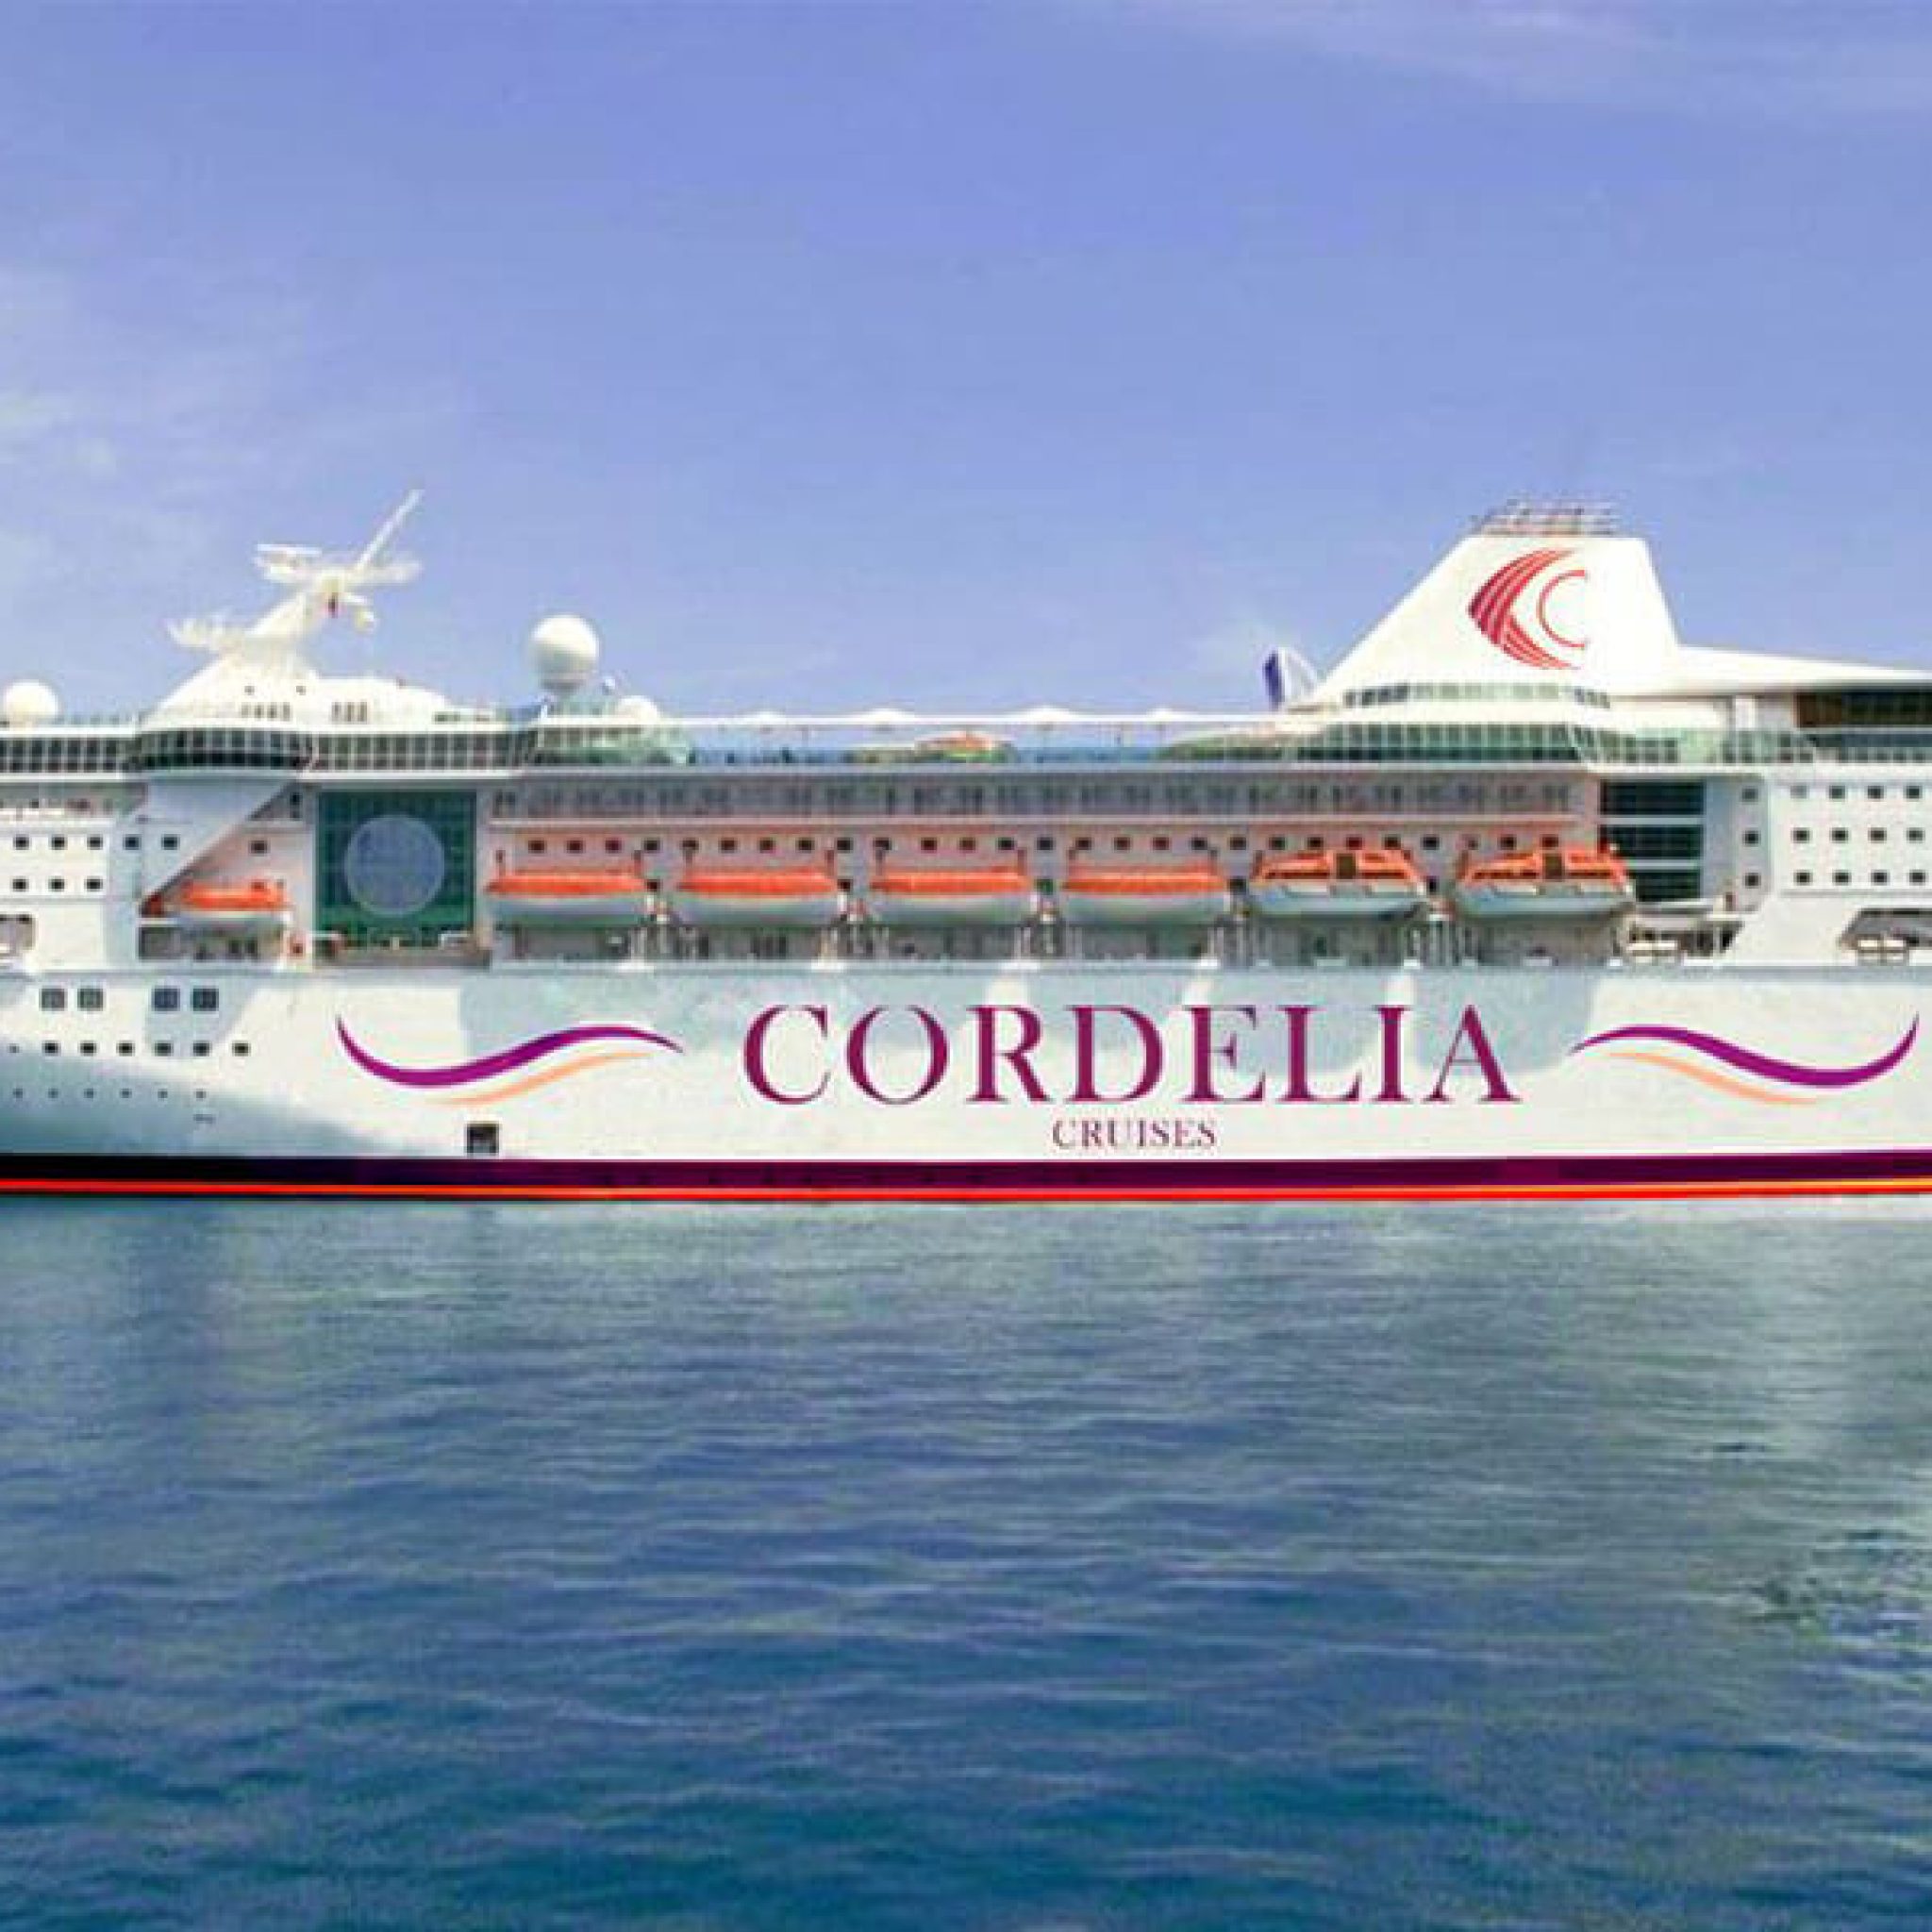 Book Your Cordelia Cruises Packages in India at a special price